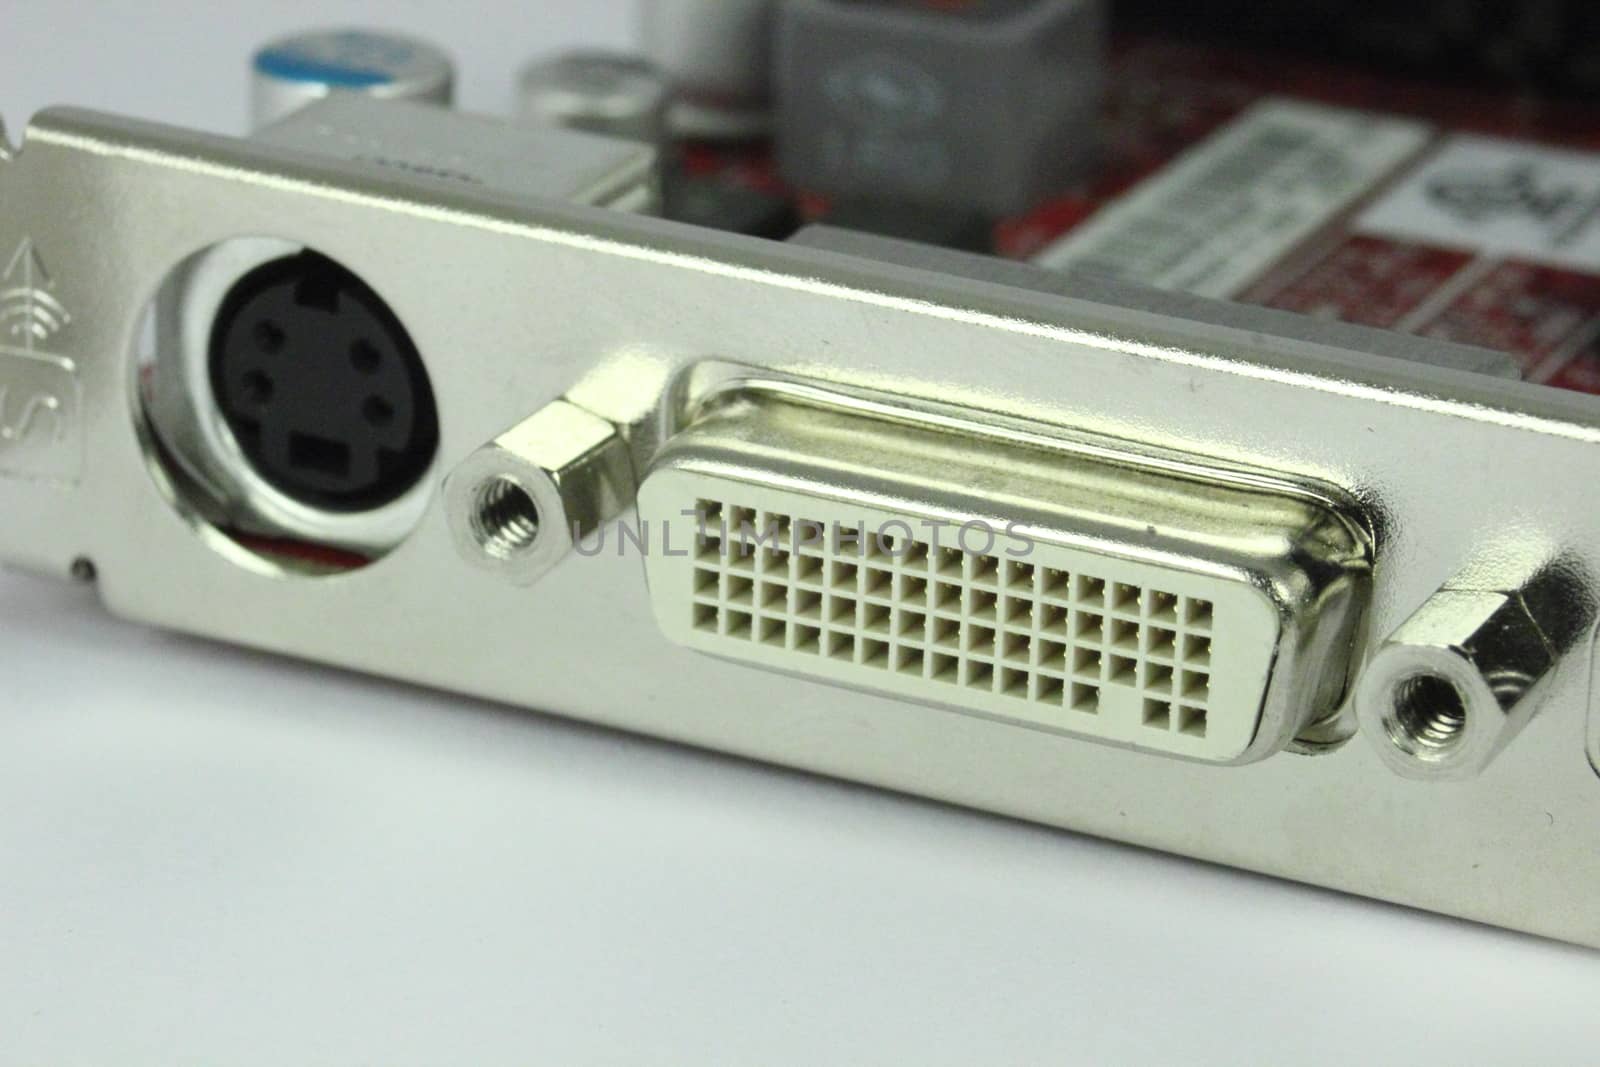 Connector on computer graphics card to digital video by HoleInTheBox